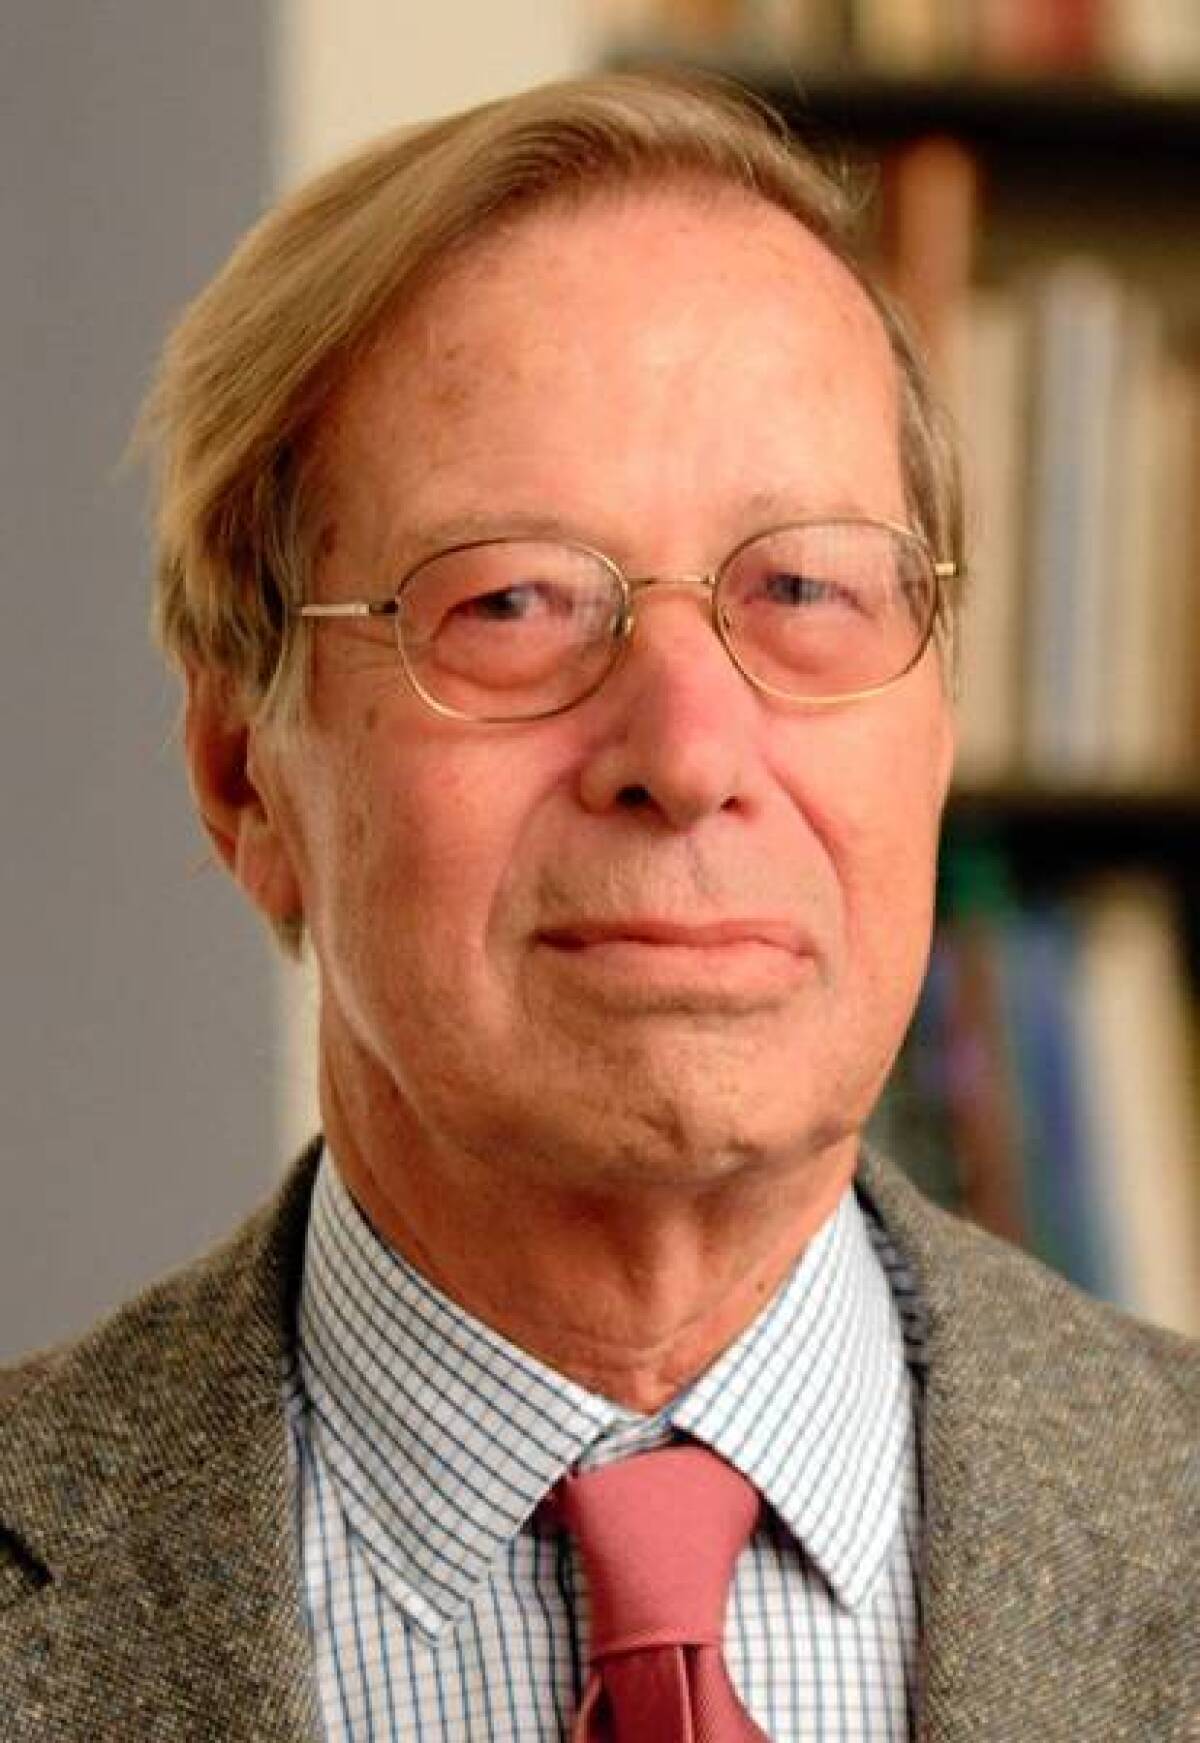 Ronald Dworkin was best known for the idea that the most important virtue the law can display is integrity — understood as the moral idea that the state should act on principle so each member of the community is treated as an equal.